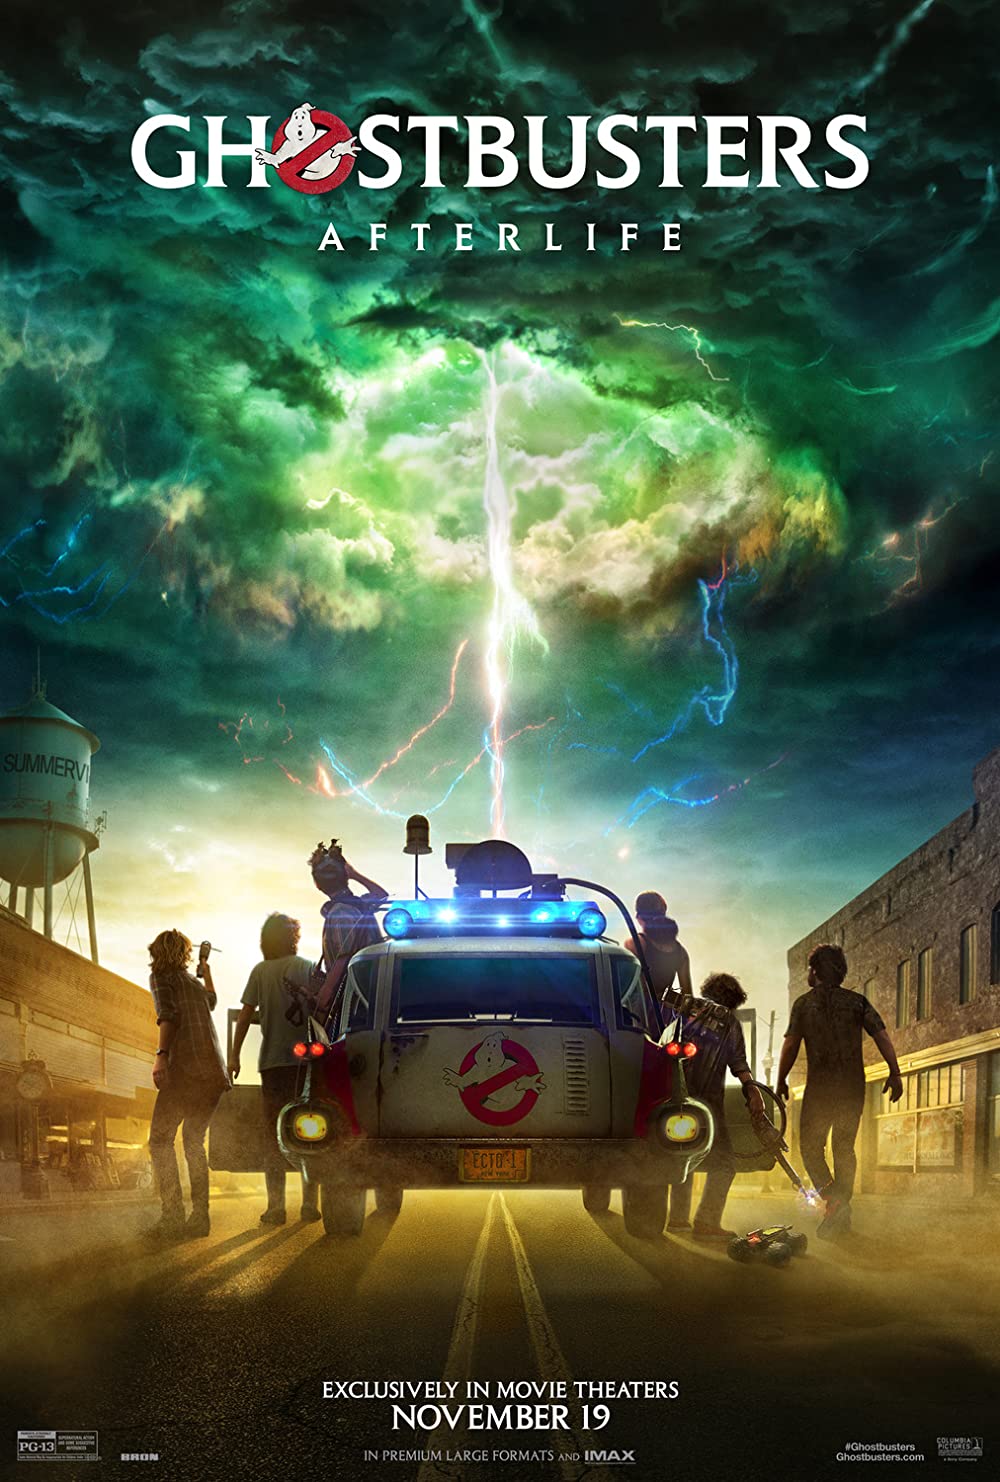 Ghostbusters: Afterlife (2021) 1:30 P.M. Matinee @ O'Brien Theatre in Renfrew